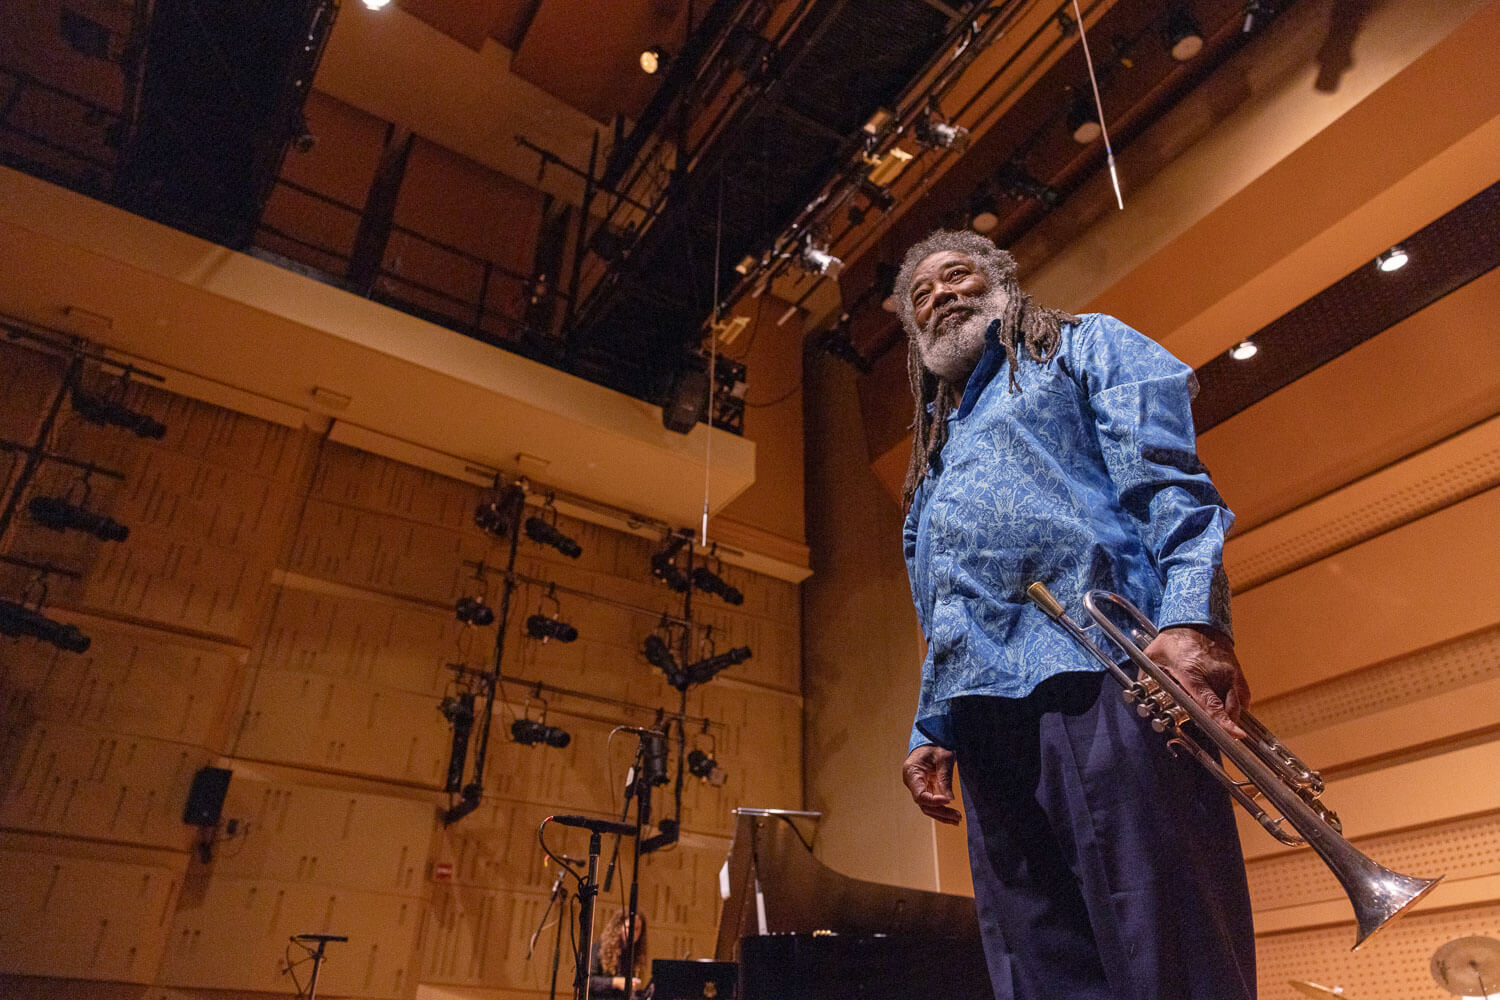 The premiere of America Transformed, from world-renowned composer Wadada Leo Smith